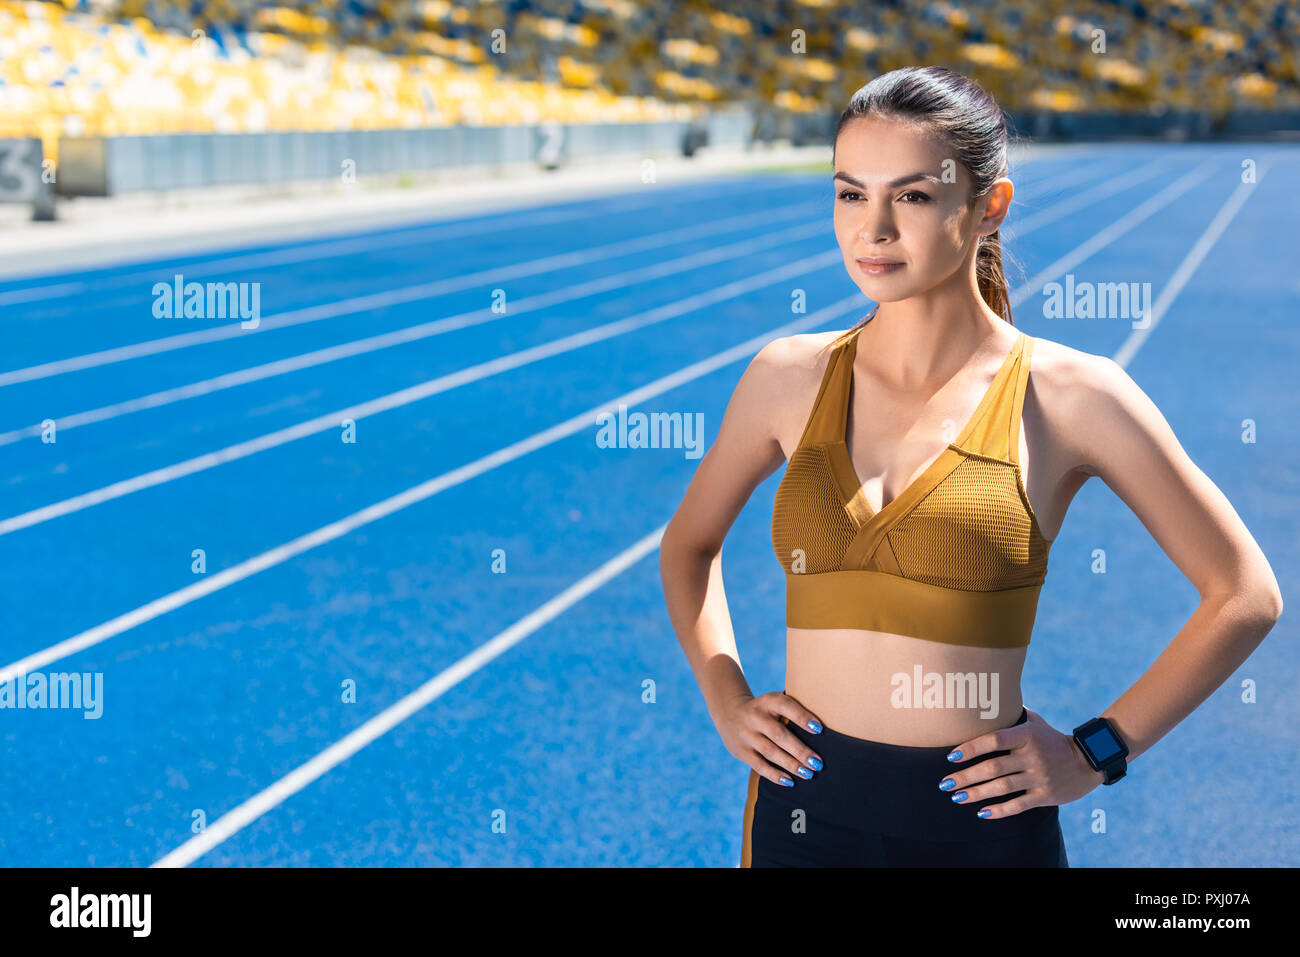 athletic female jogger with arms akimbo on running track at sports stadium Stock Photo